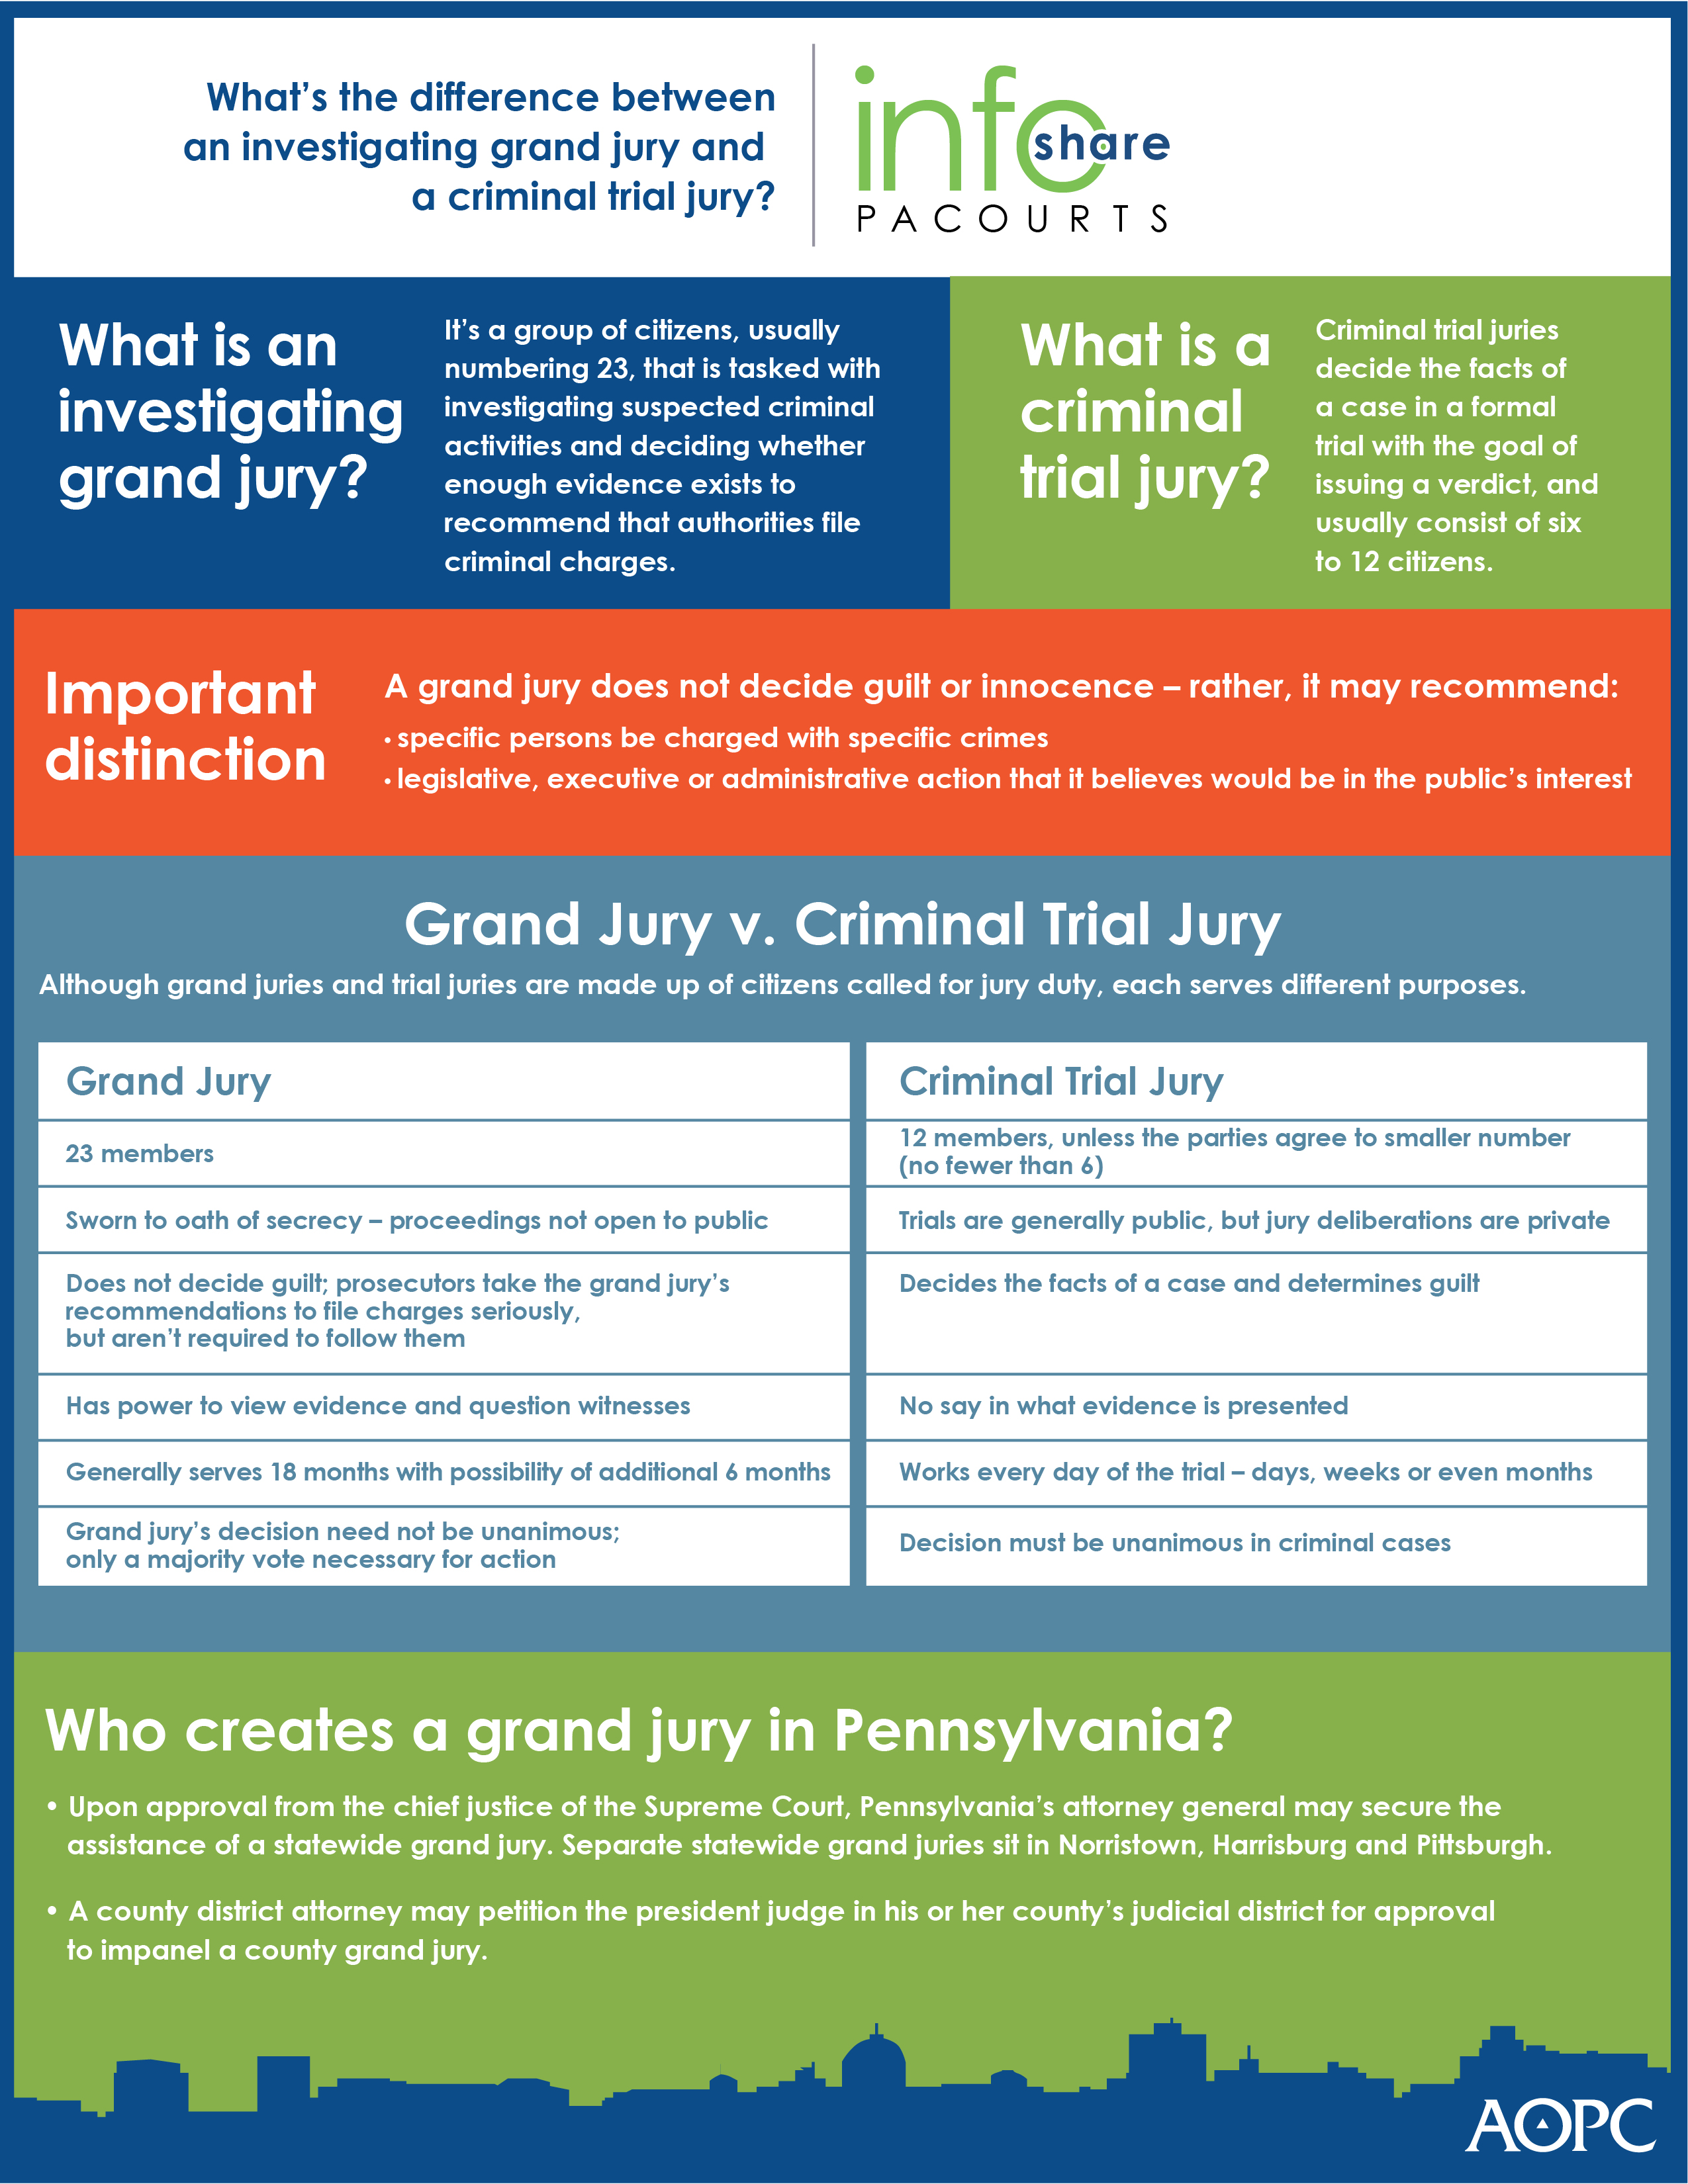 What is the difference between an investigating grand jury and a criminal trial jury - 006252.jpg